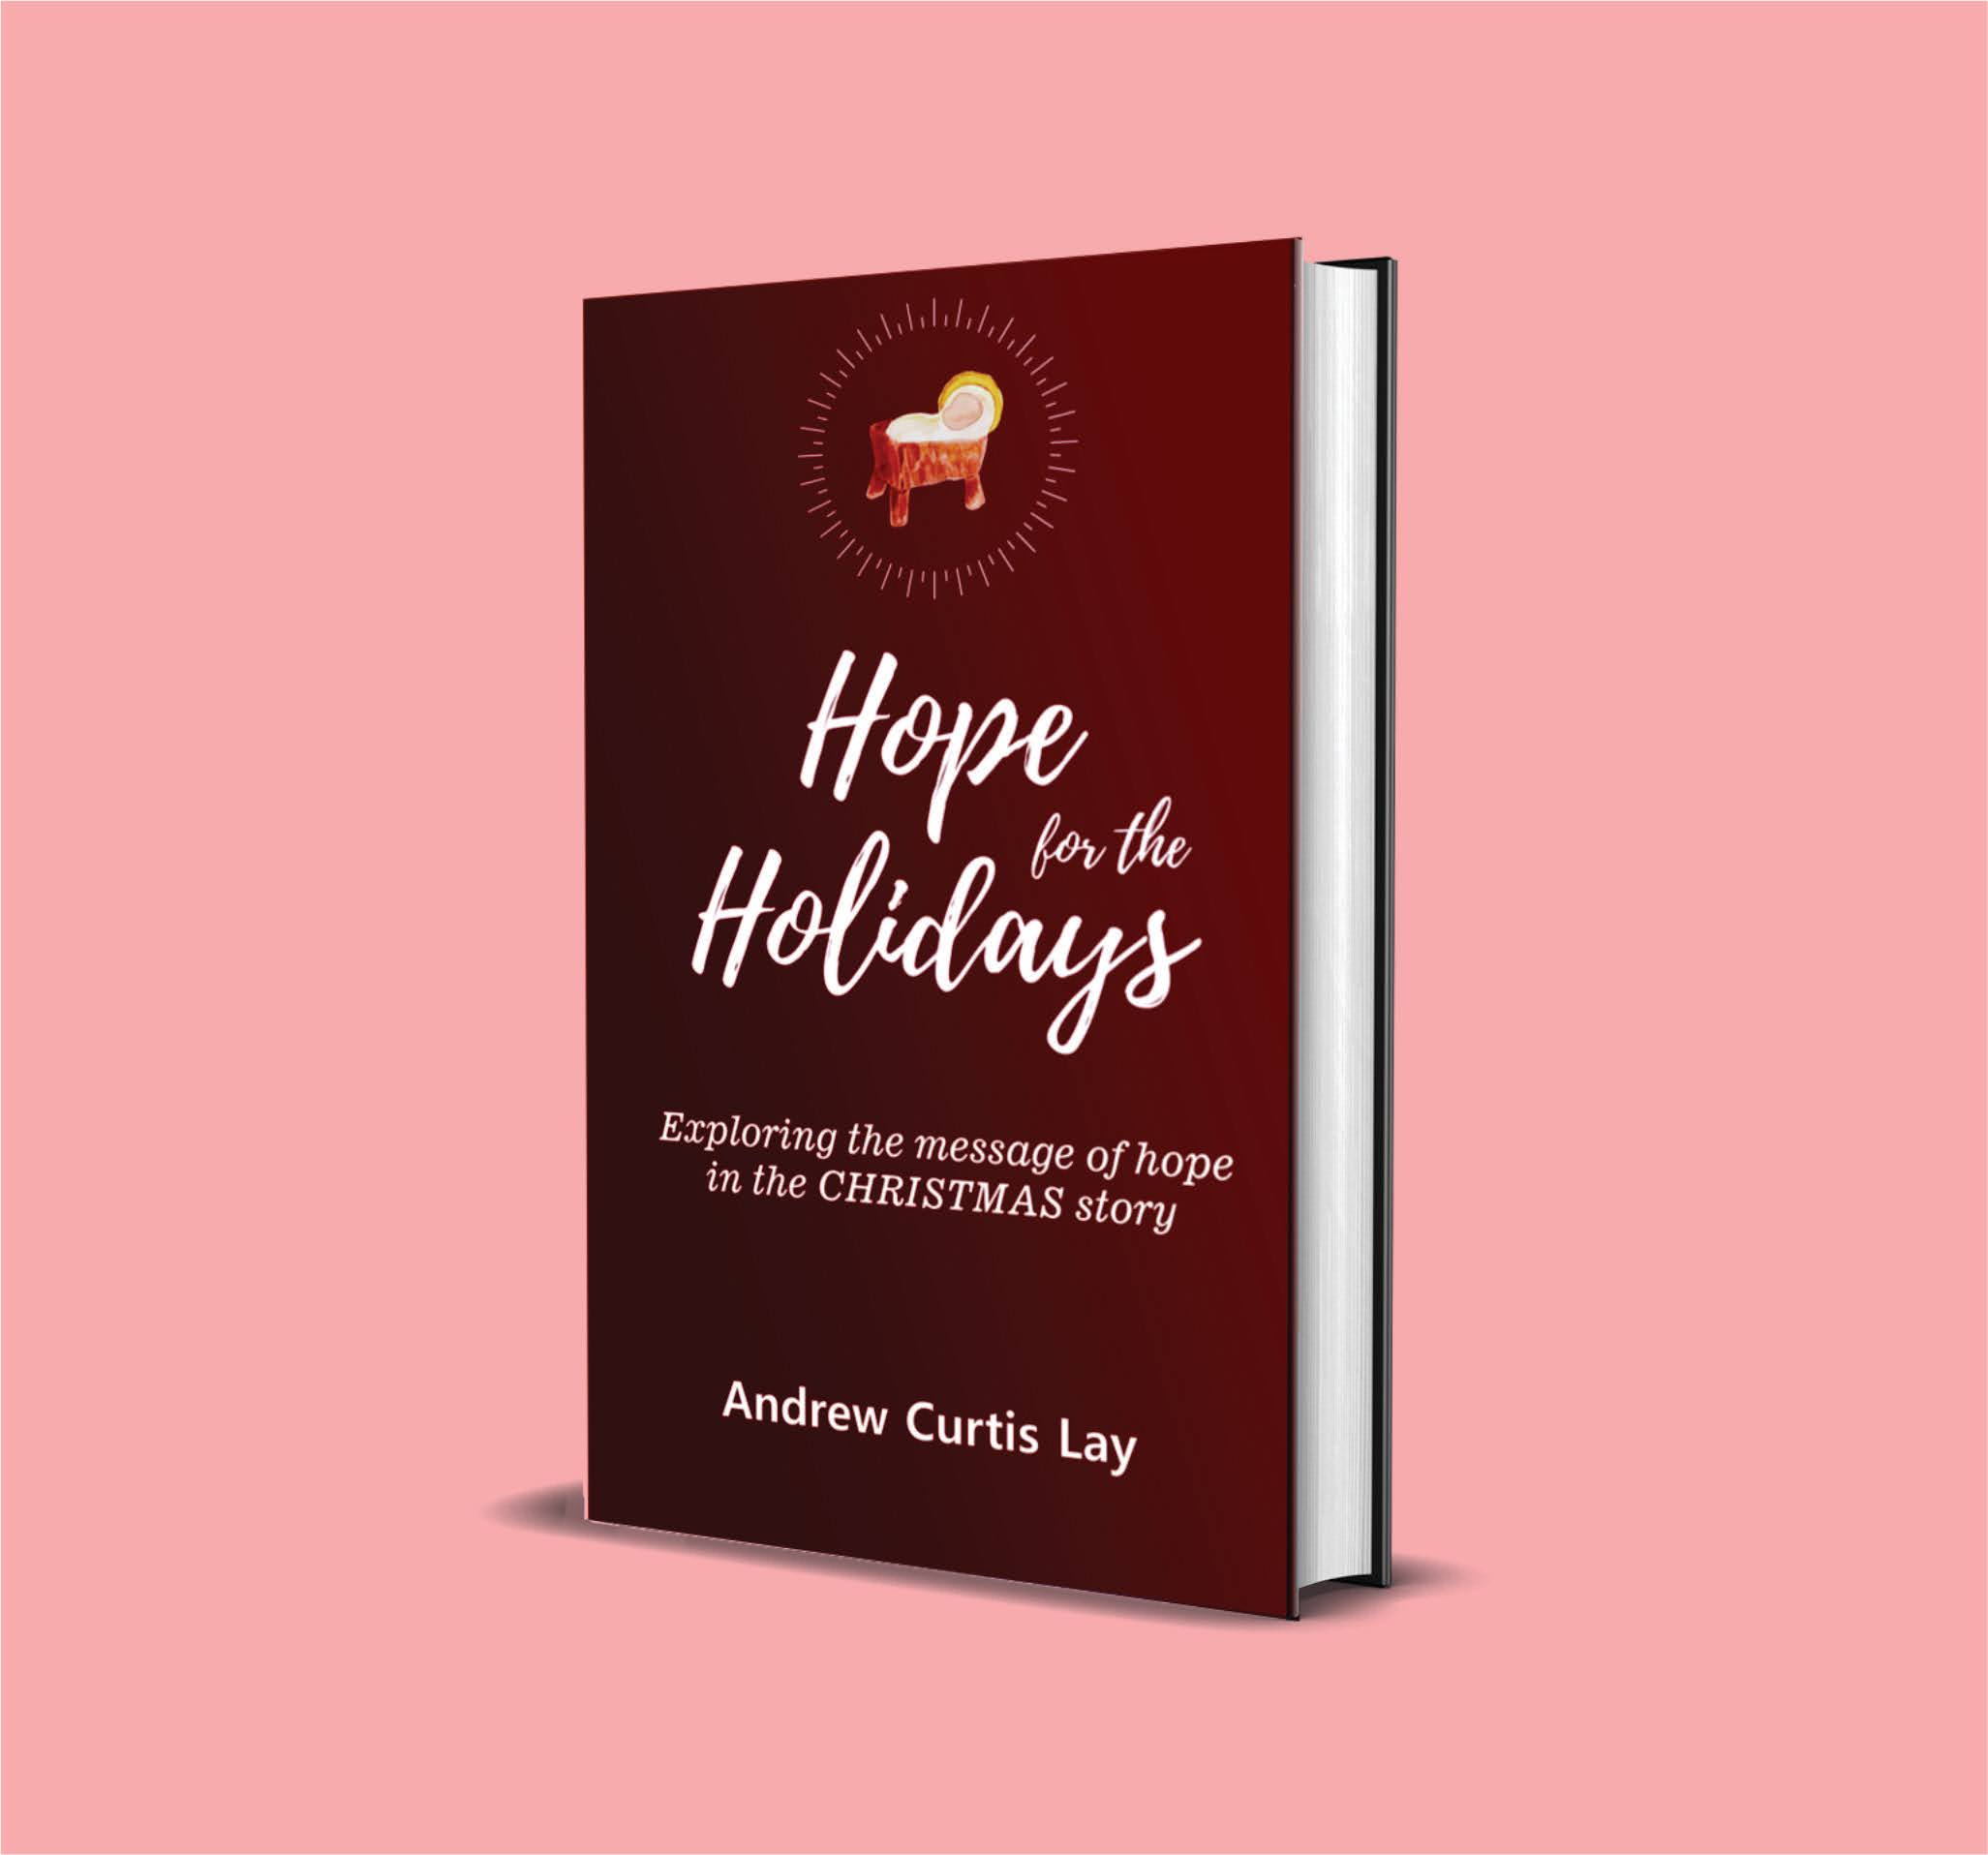 Hope for the Holidays: Exploring the Message of Hope in the Christmas Story - by Andrew Curtis Lay